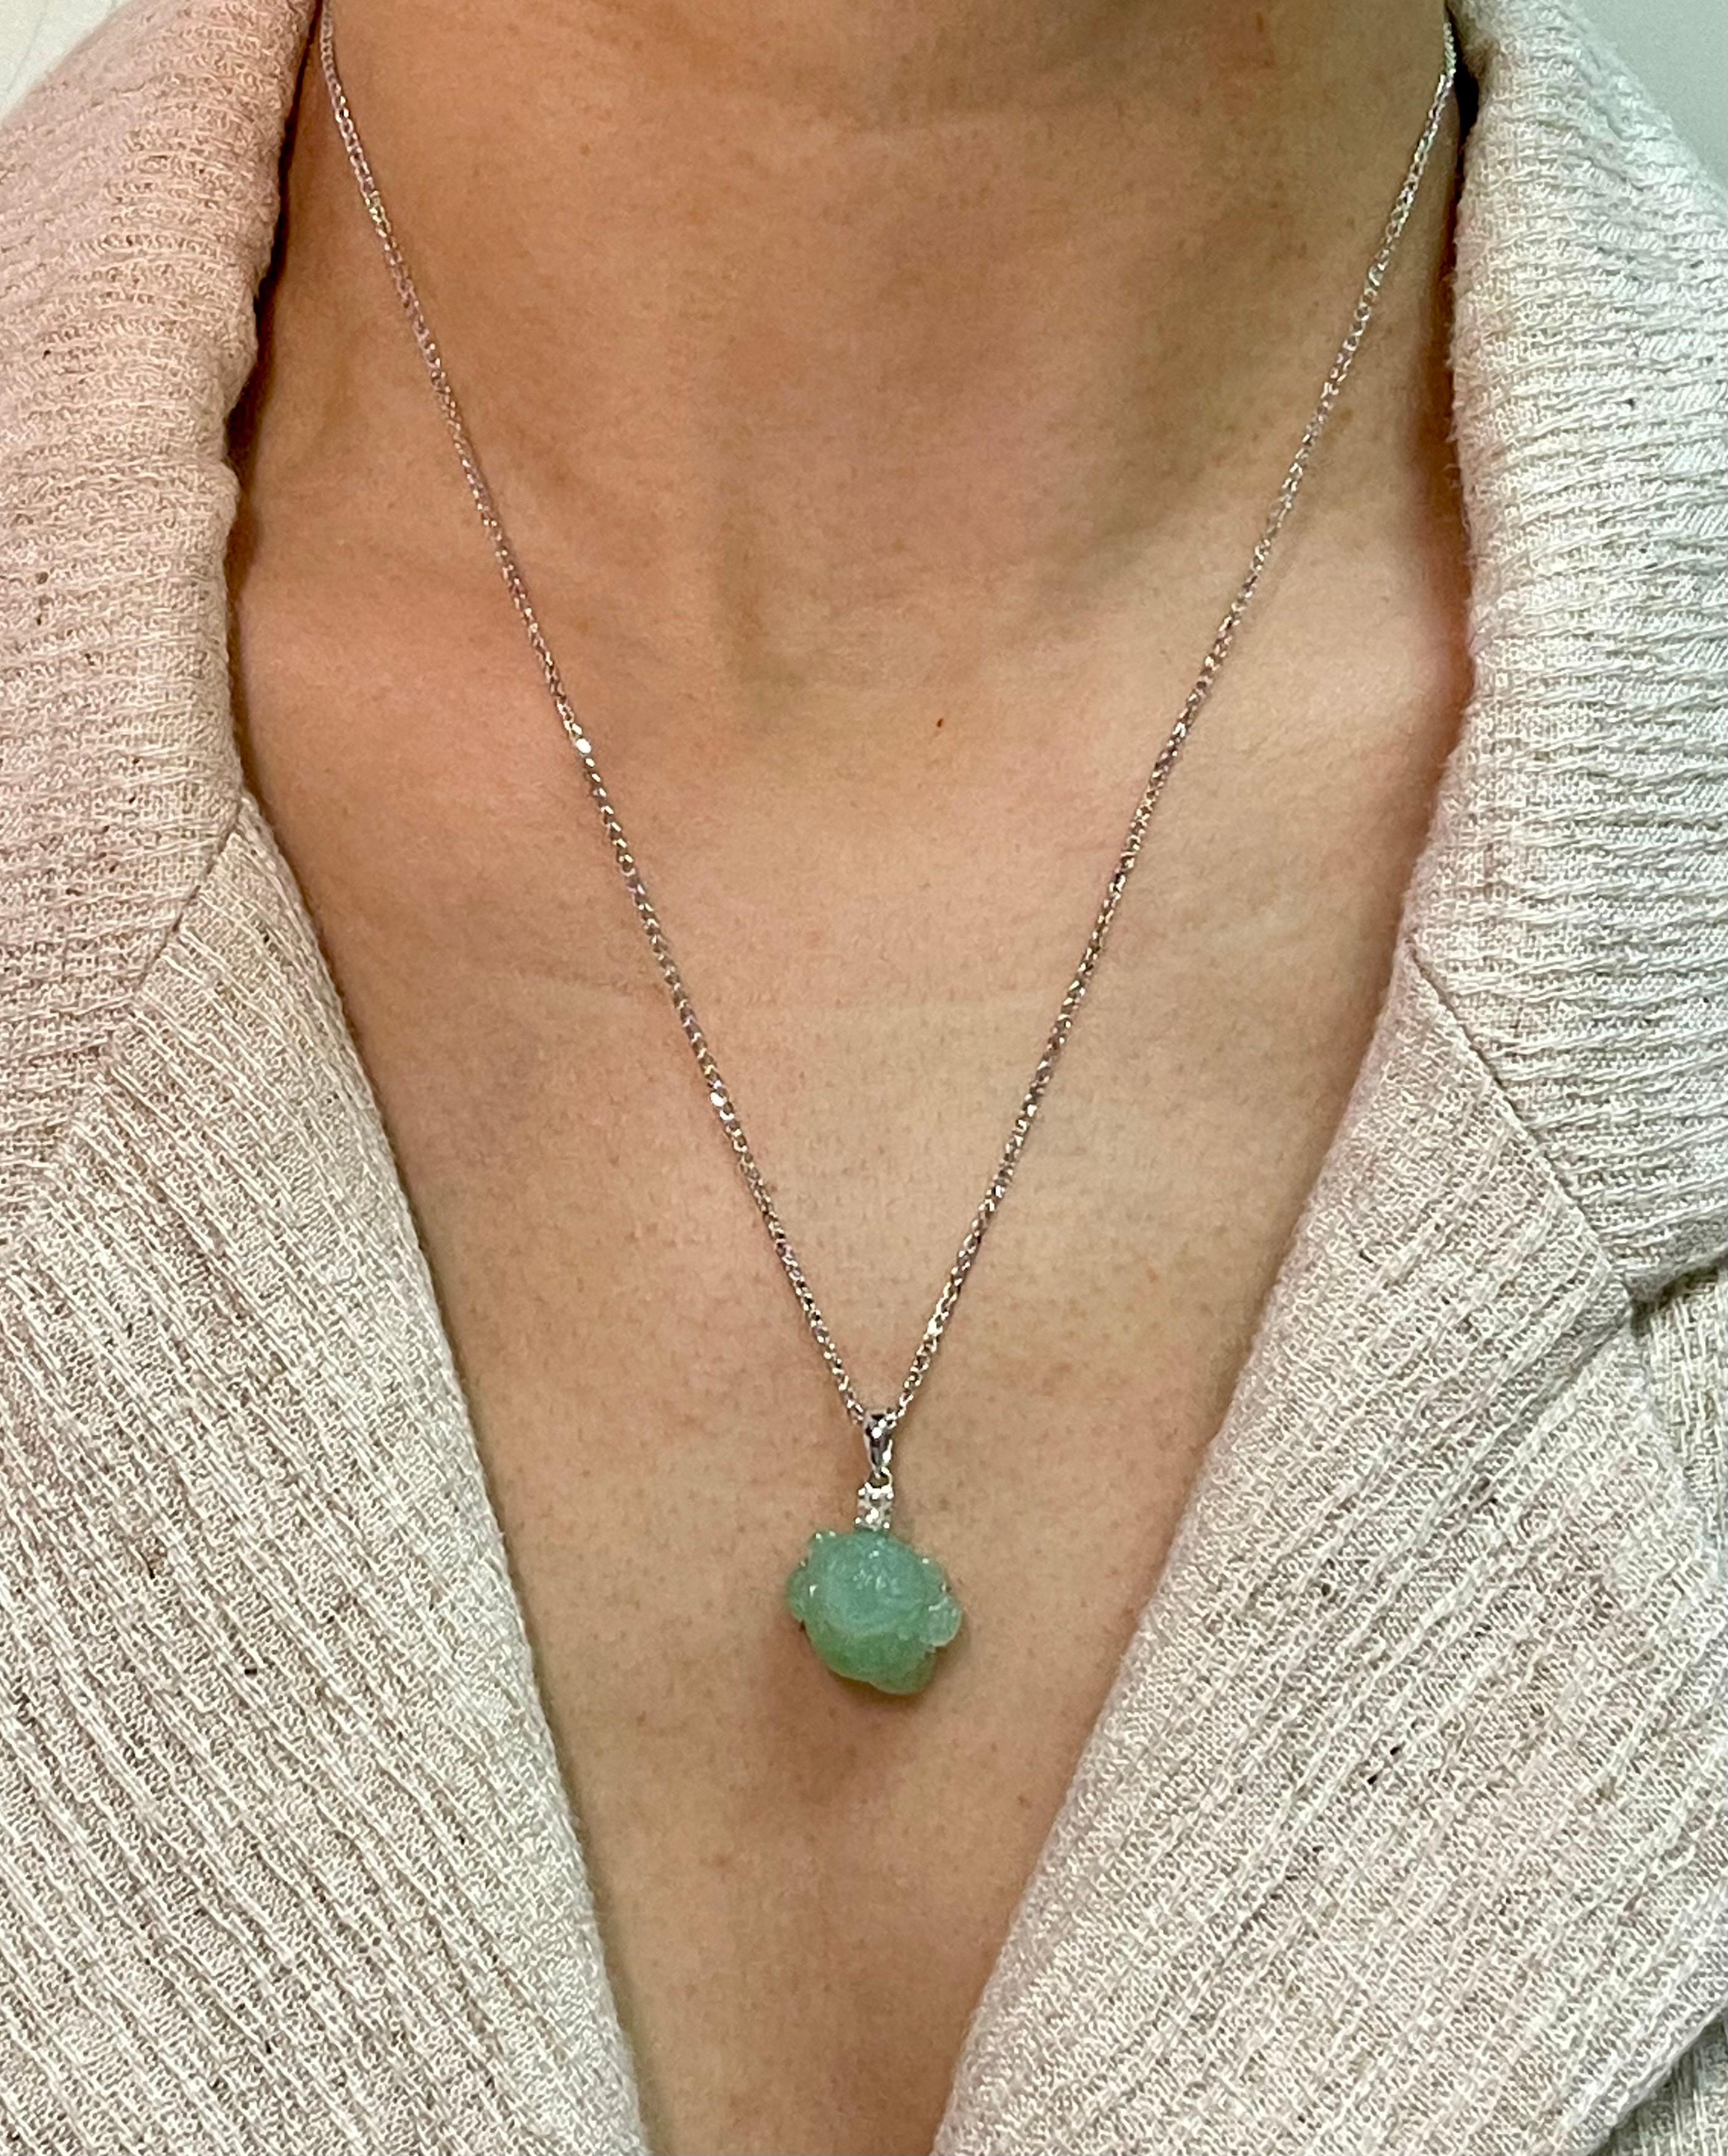 Please check out the HD Video. Here is a super well carved jade pendant drop necklace with Icy green color. It is certified by 2 labs. The icy green jade is a carving of a mythical beast associated with warding off evil spirits and attracting